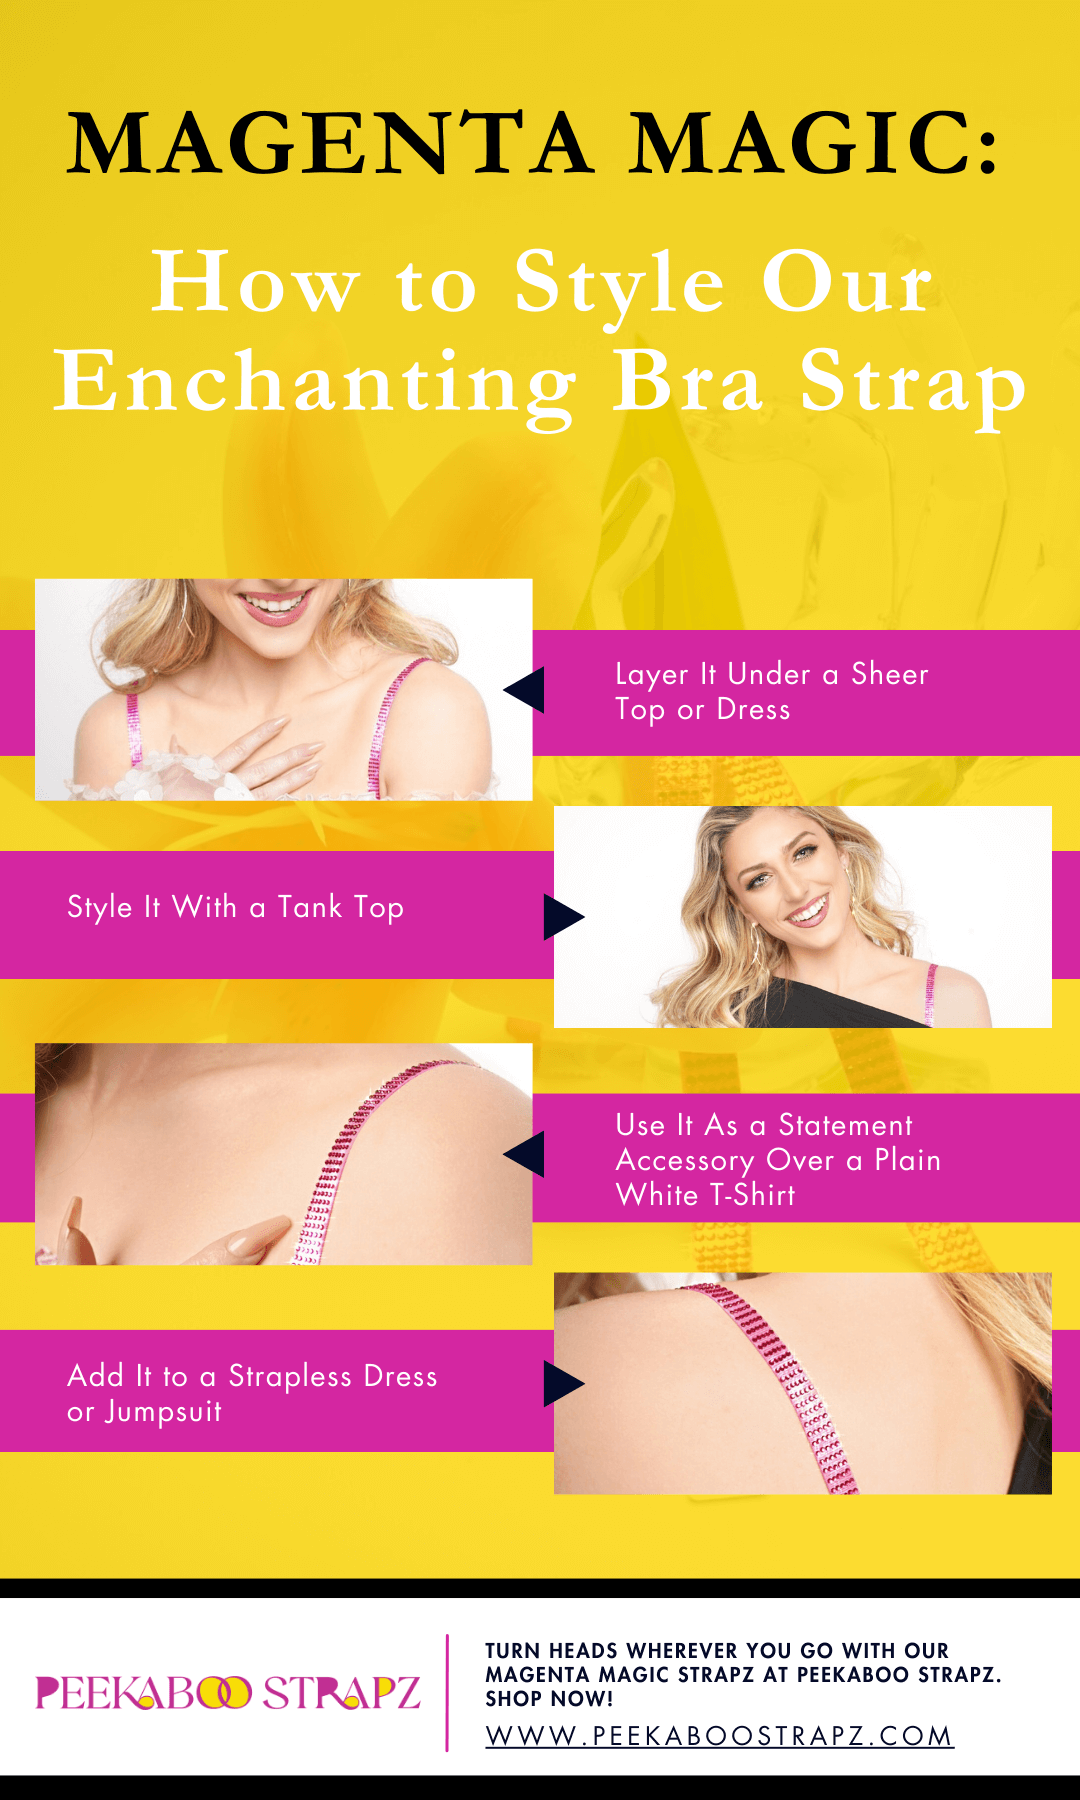 Magenta Magic - How to Style Our Enchanting Bra Strap infographic